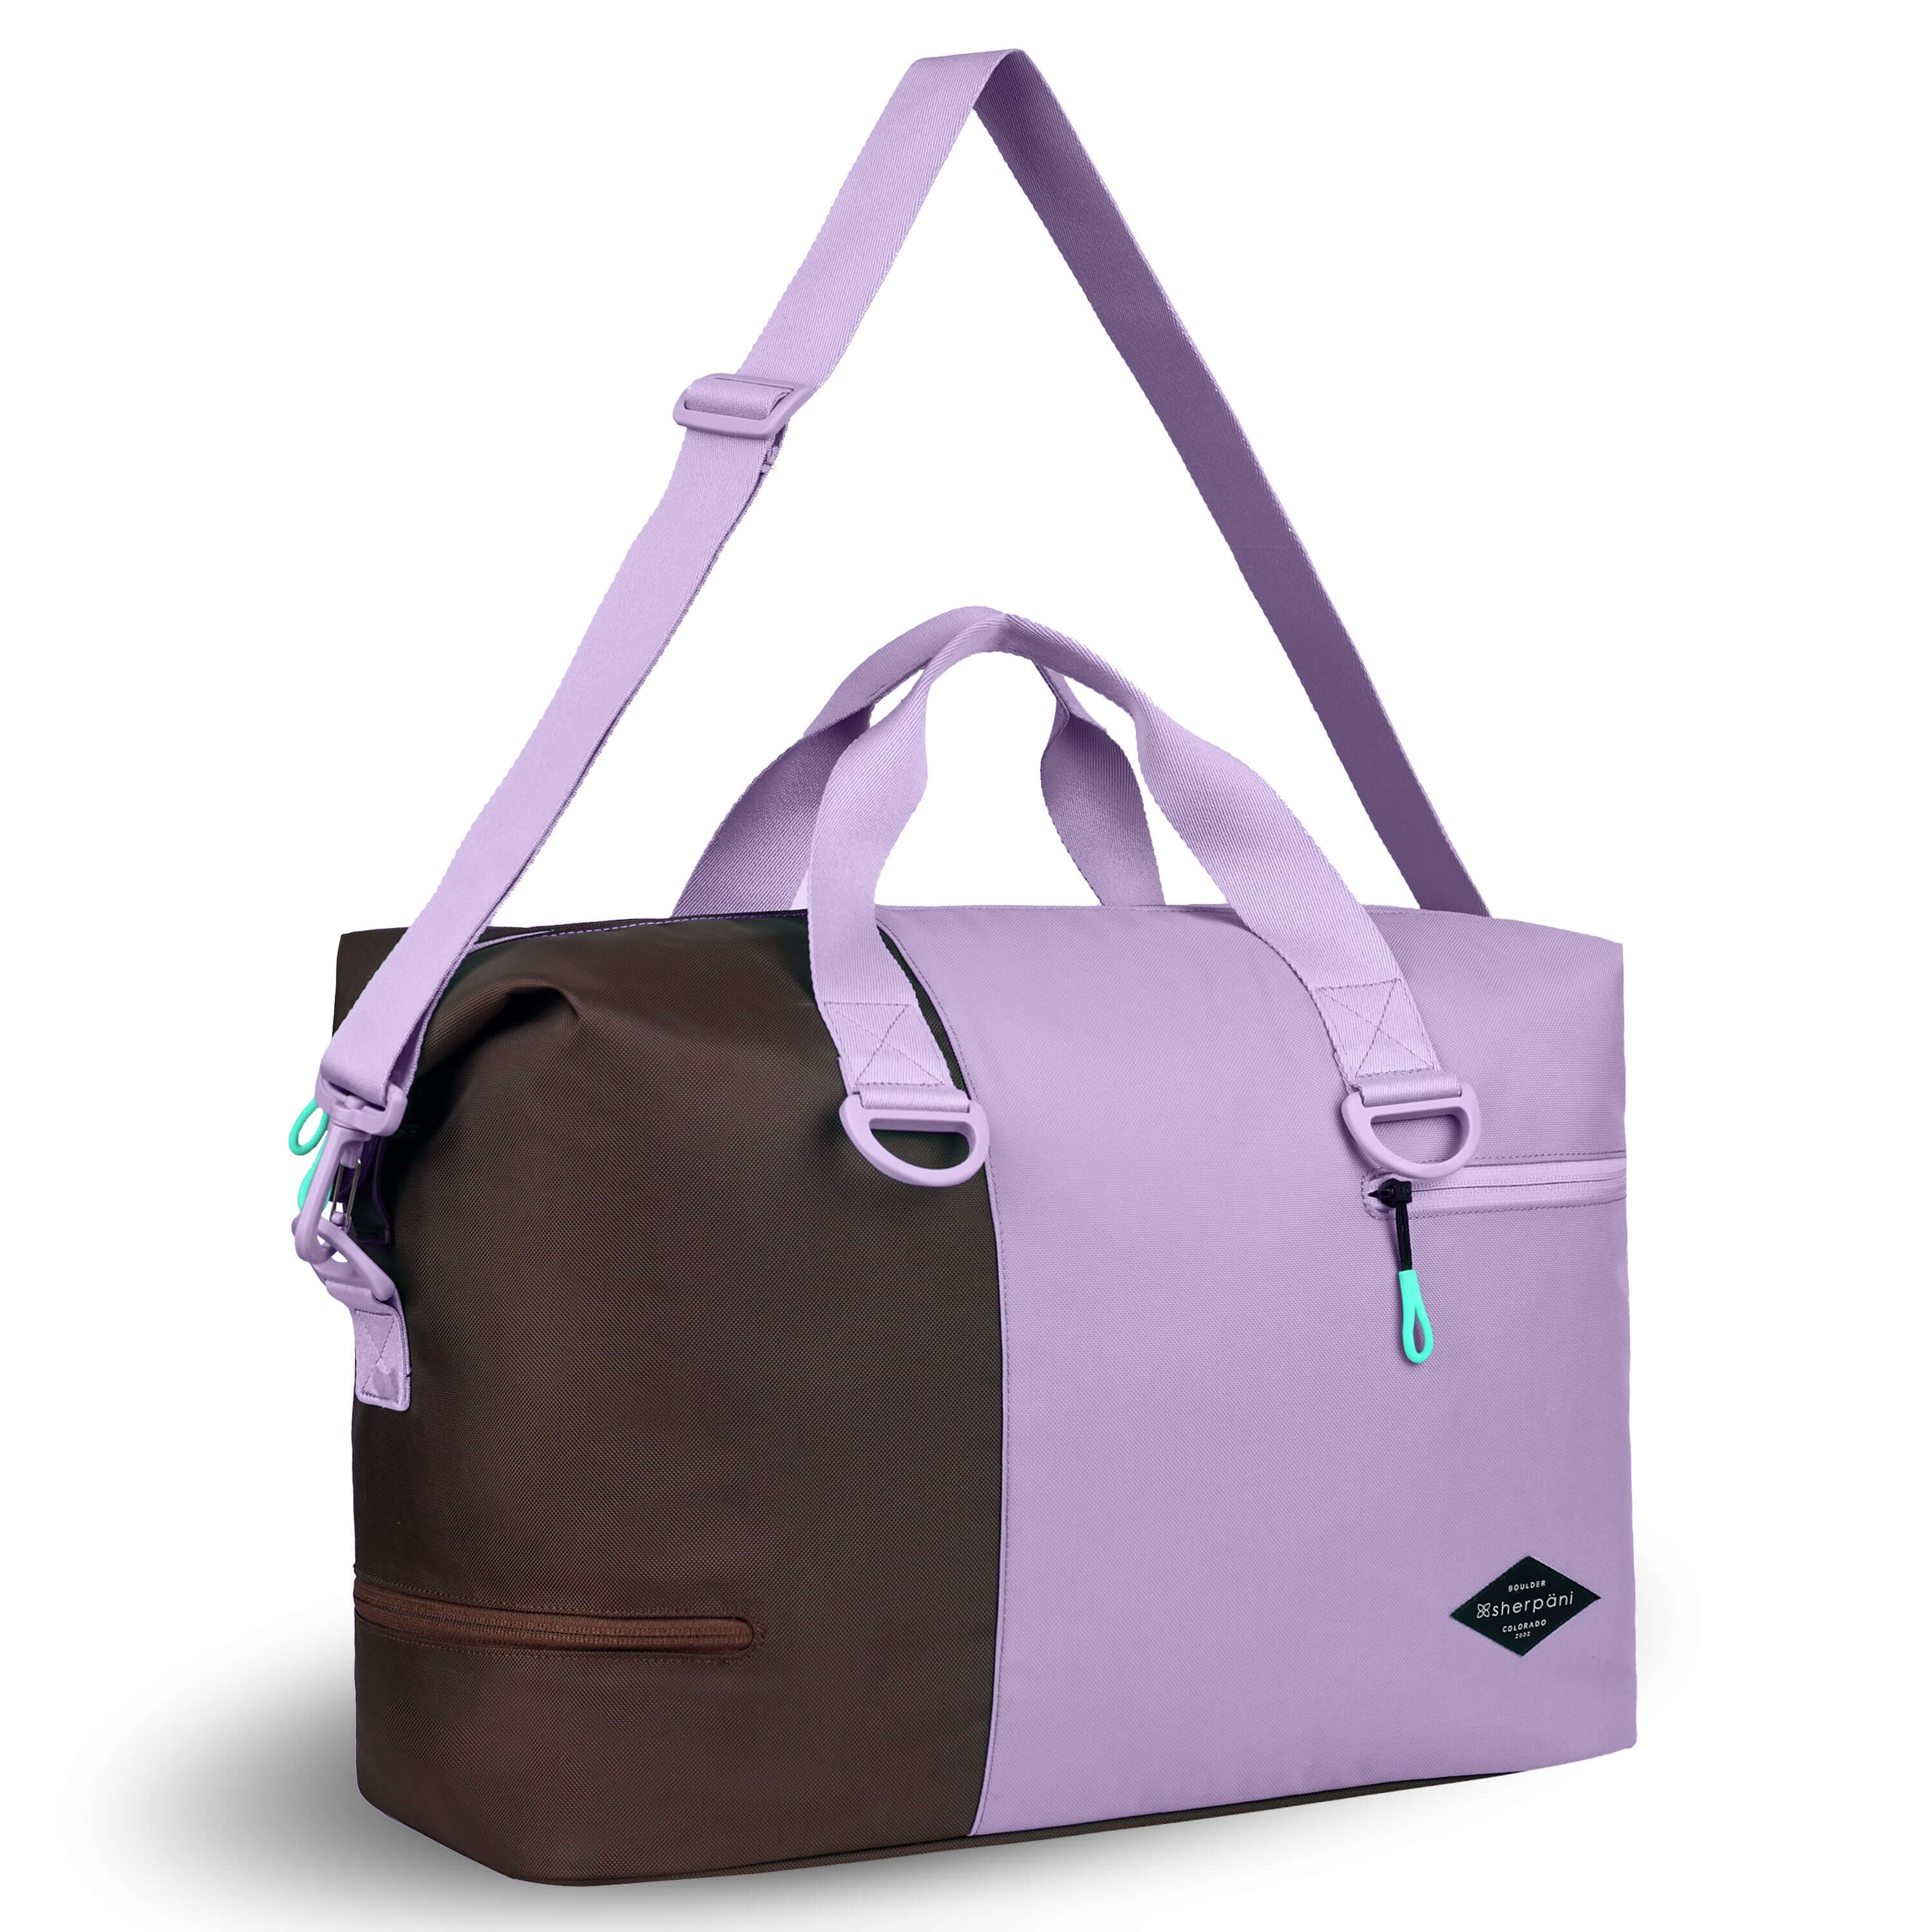 Angled front view of Sherpani bag, the Sola in Lavender. The bag is two-toned in lavender and brown. Two external zipper compartments are visible on the top right and bottom left of the bag. Easy-pull zippers are accented in aqua. The bag has tote handles and an adjustable/detachable crossbody strap. #color_lavender